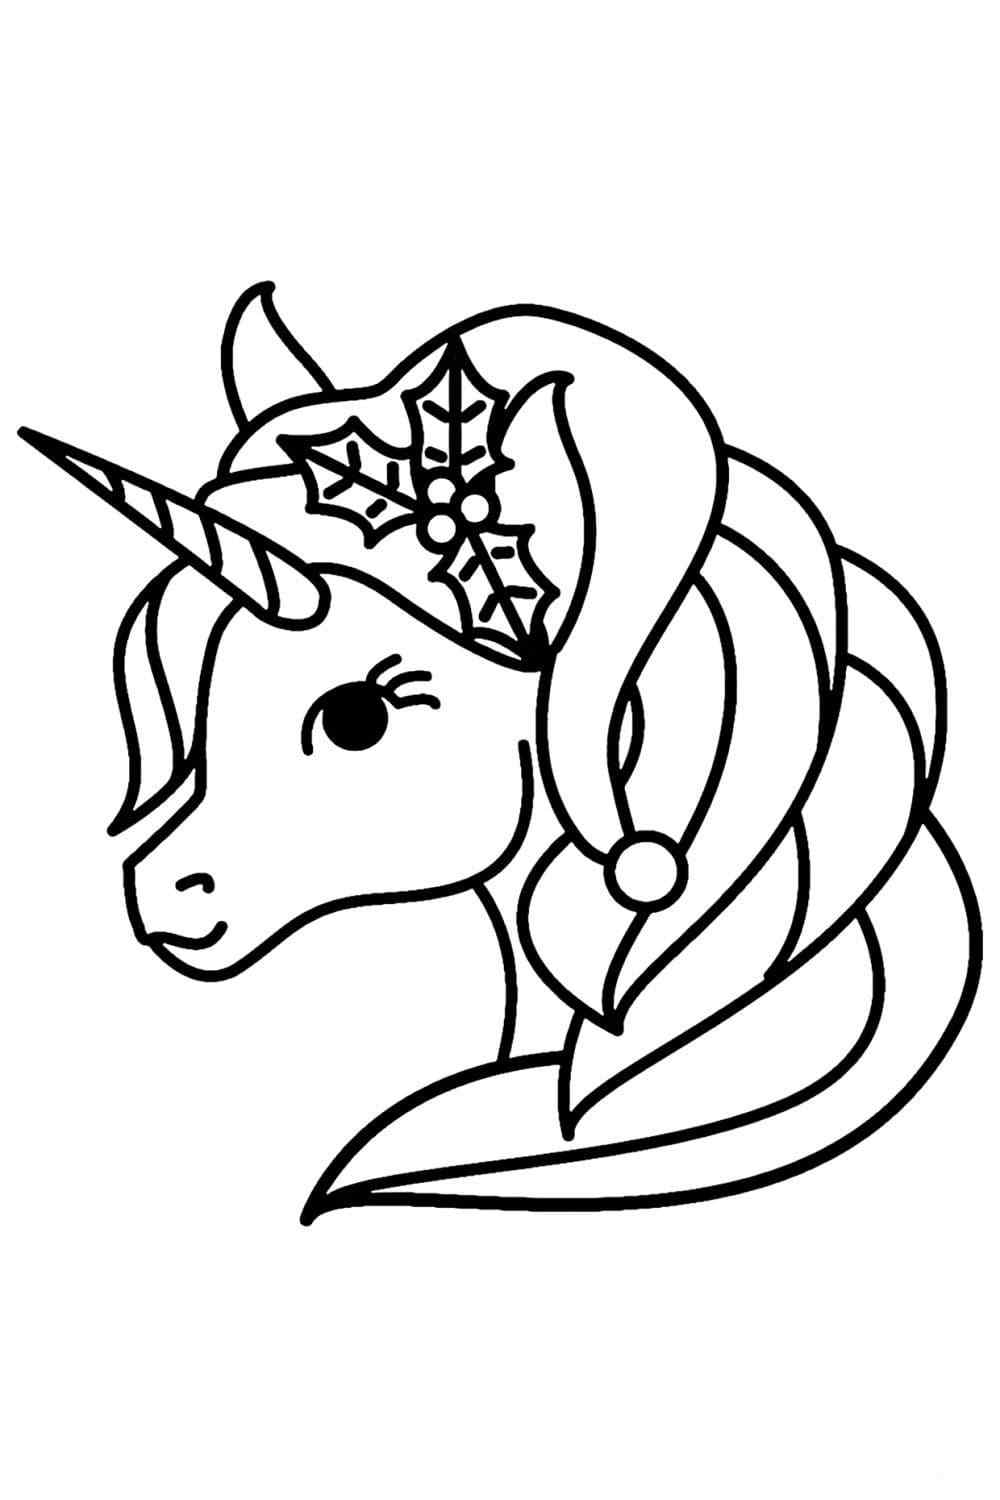 Winter Flowers Adorn The Unicorn's Mane Coloring Pages   Coloring Cool